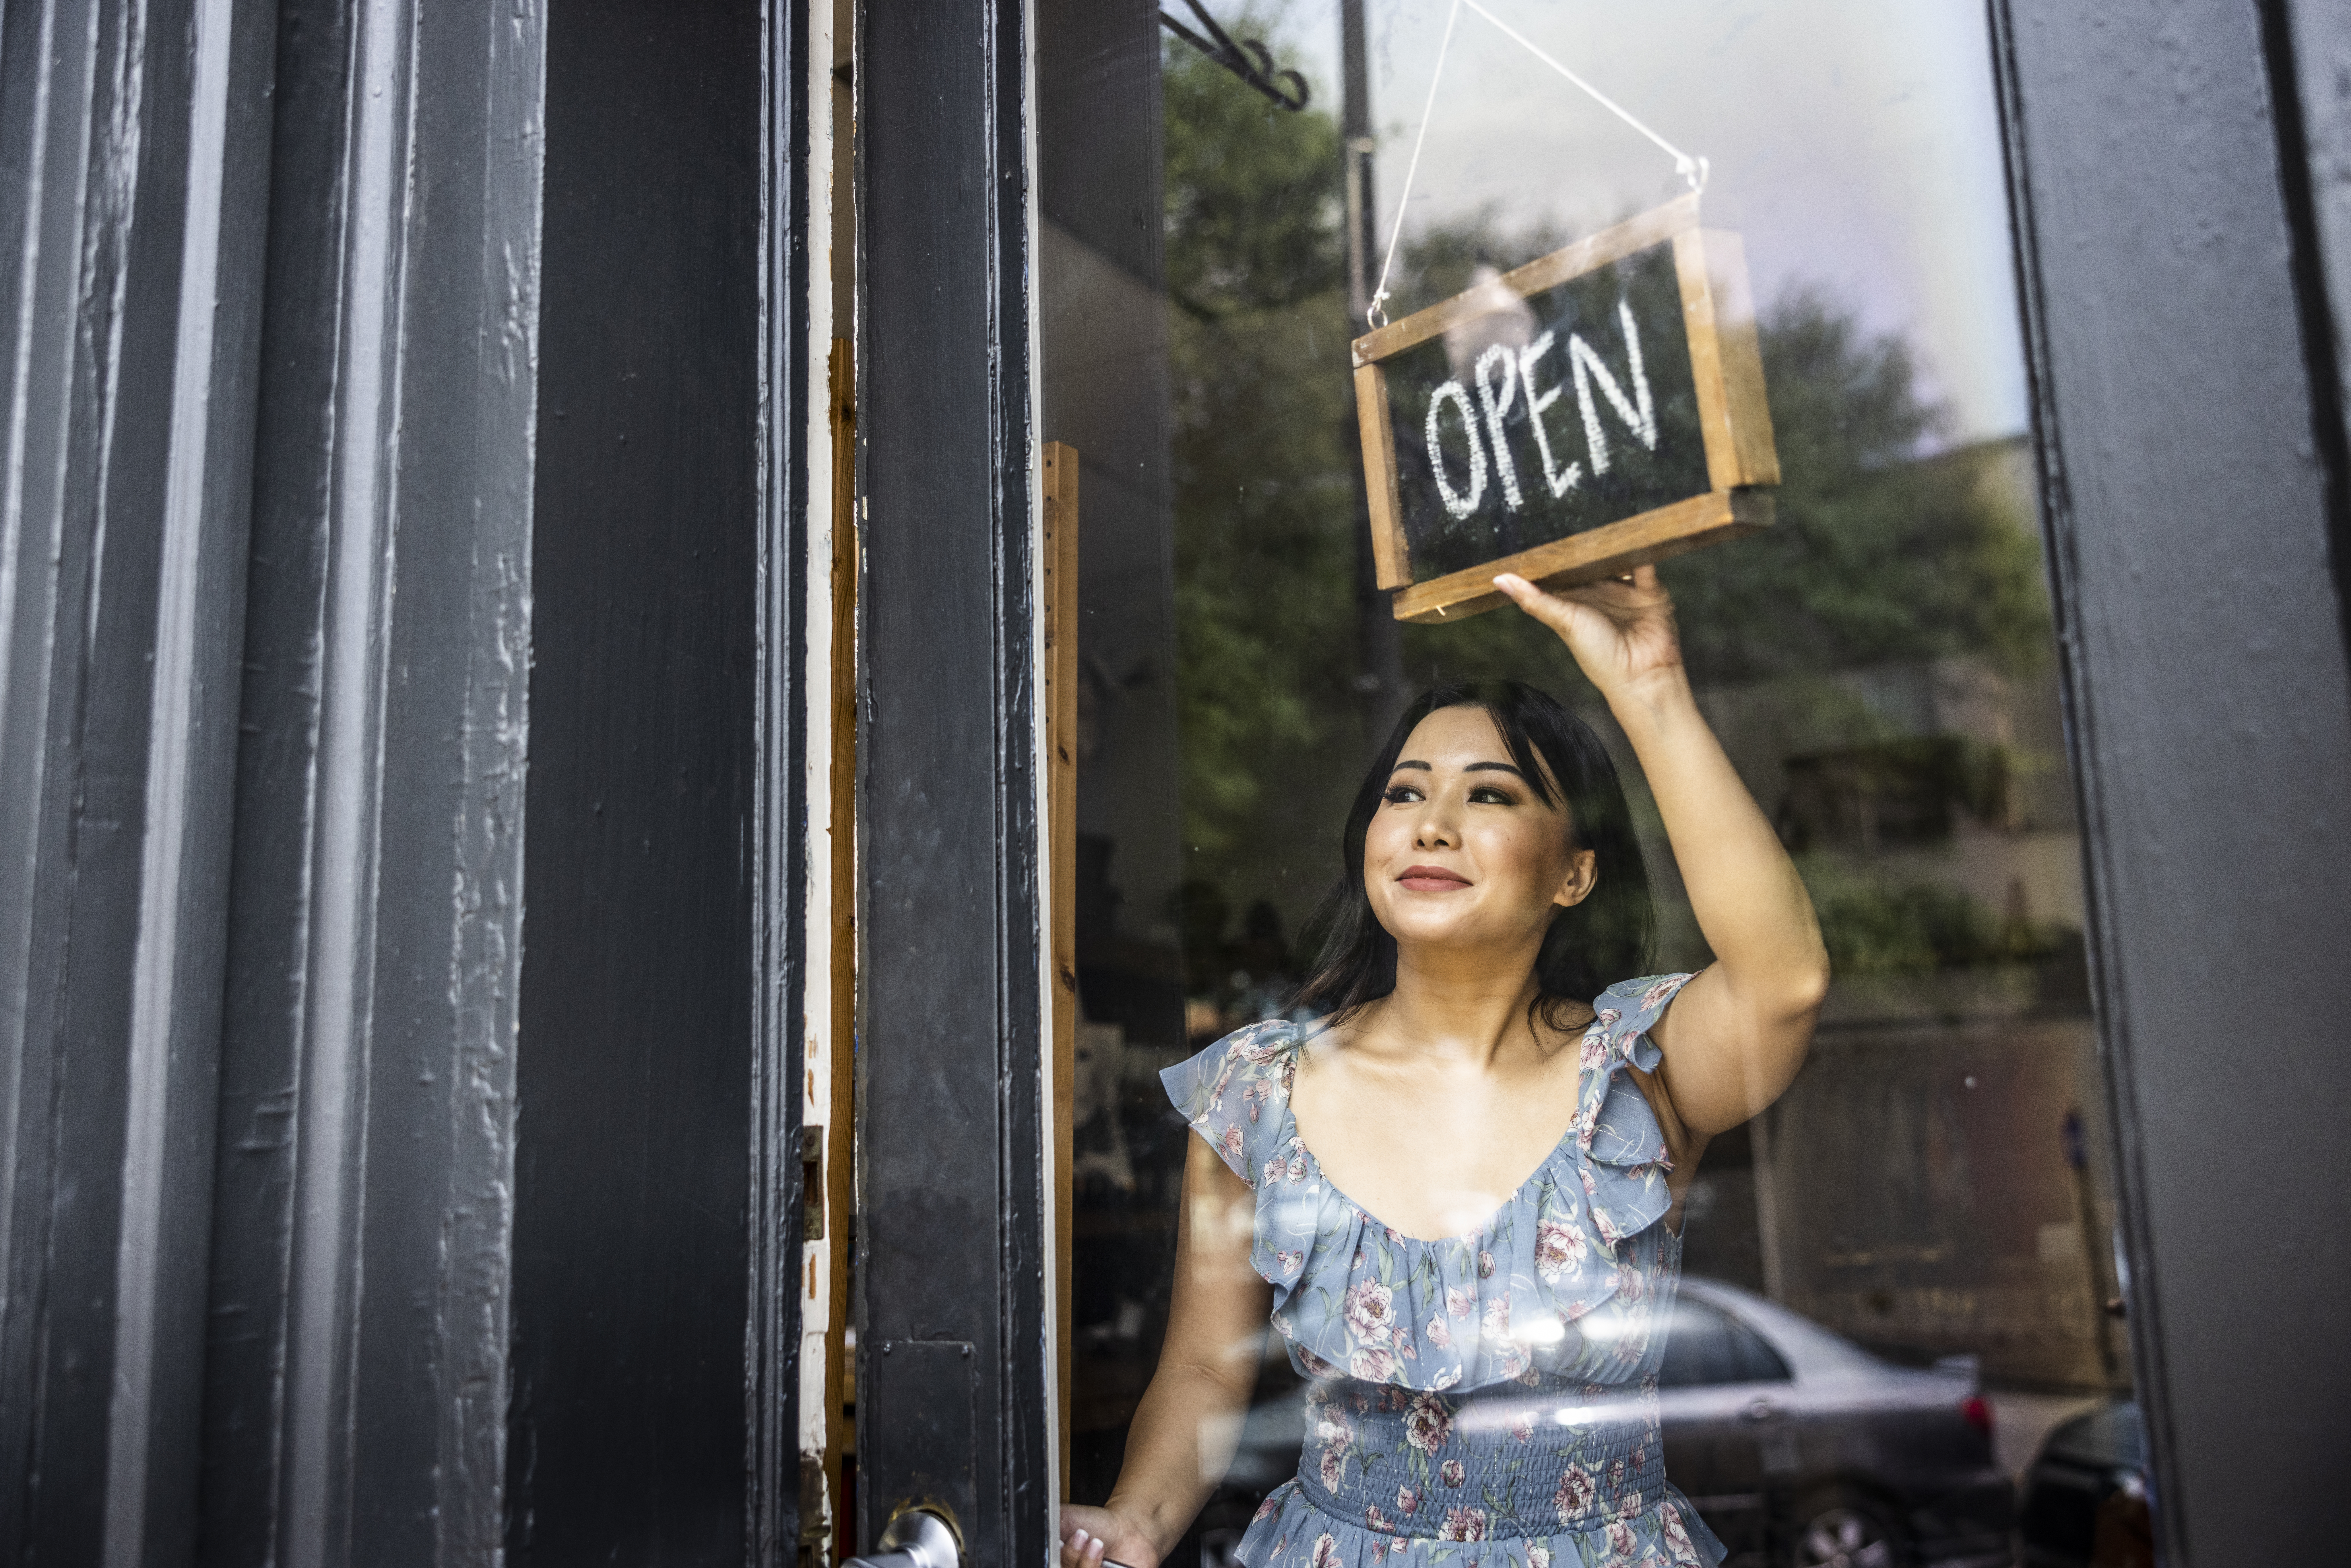 5 ways to prepare your small business for the holiday rush